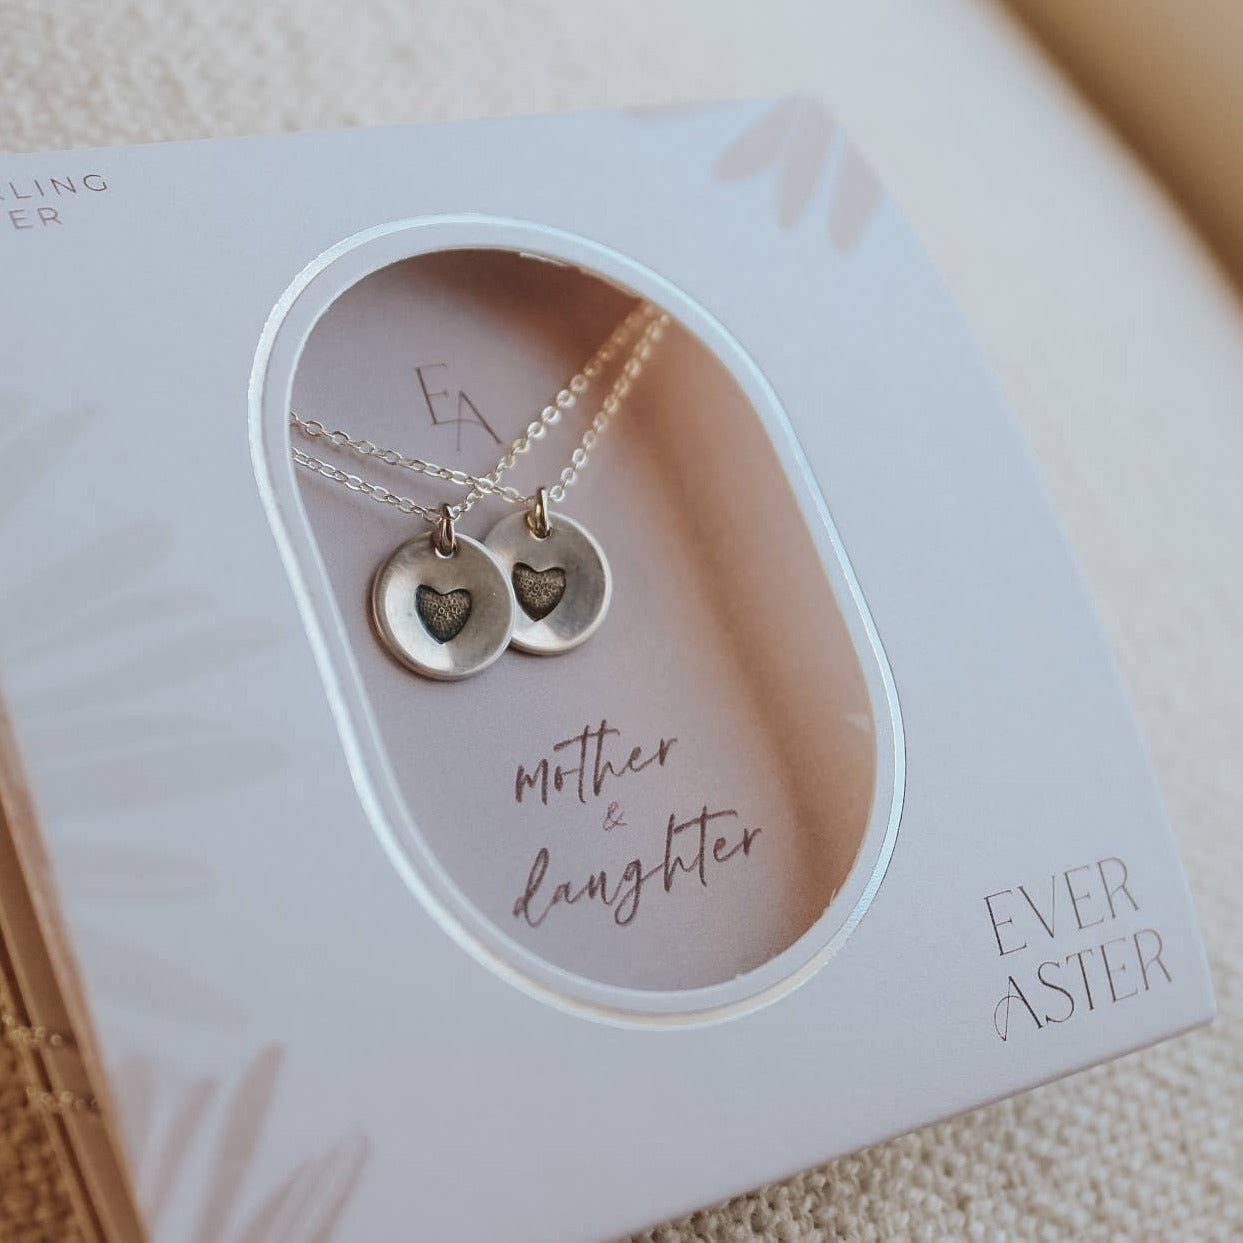 Xmas Presents Mothers Day Gifts for Mum Mother Daughter Necklace Birthday  J316 | eBay